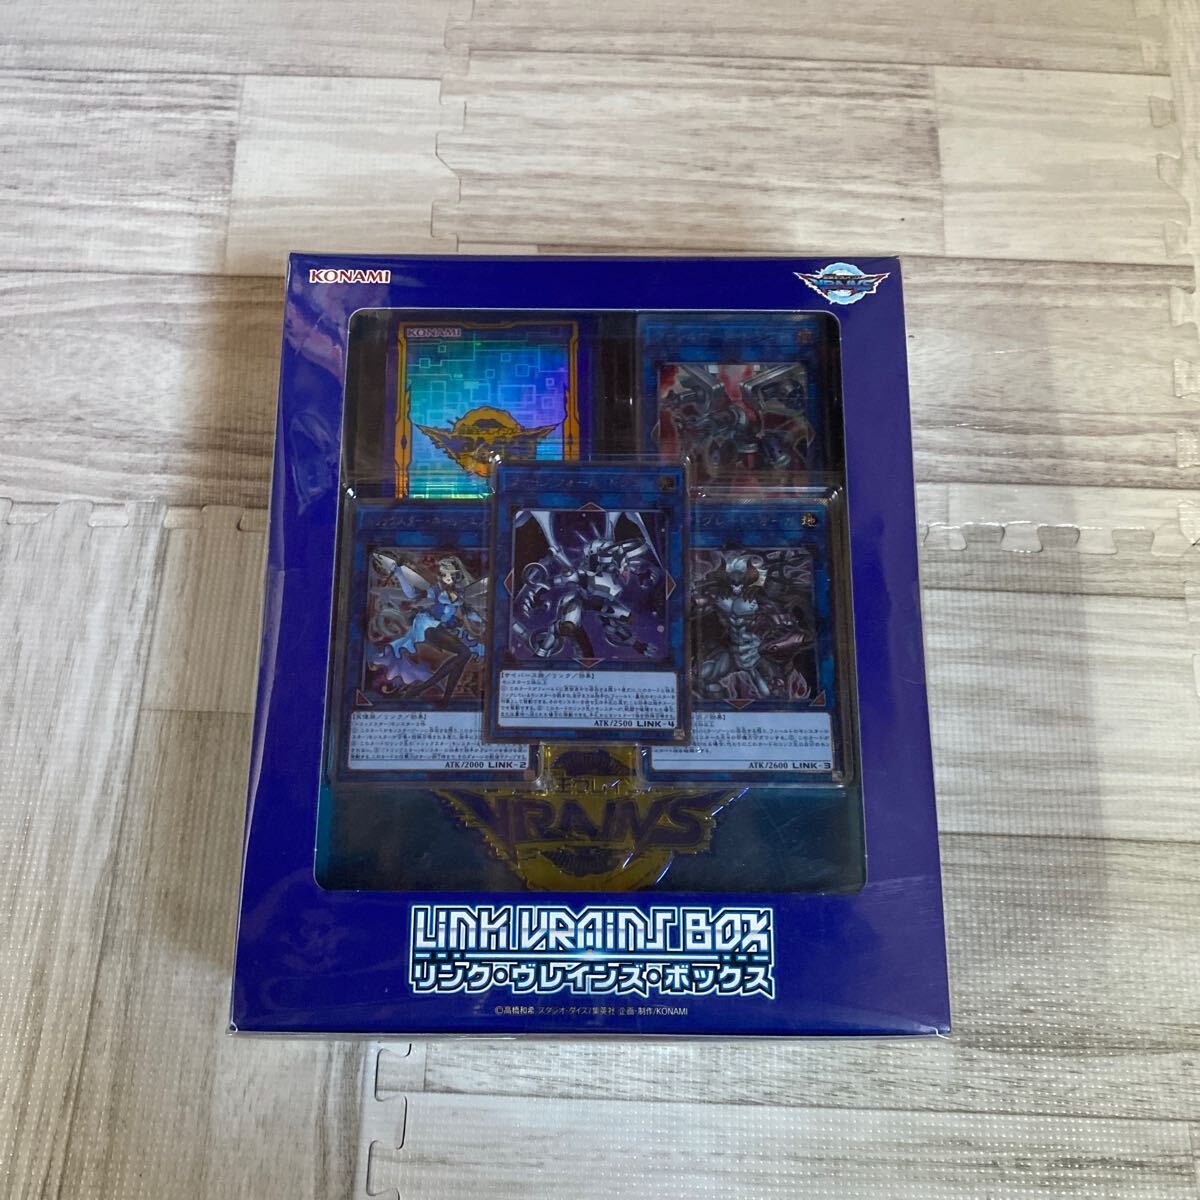 3000 start ultra rare * unopened, unused * Yugioh OCG Duel Monstar zLINK VRAINS BOX that time thing that time thing rare rare Vintage 